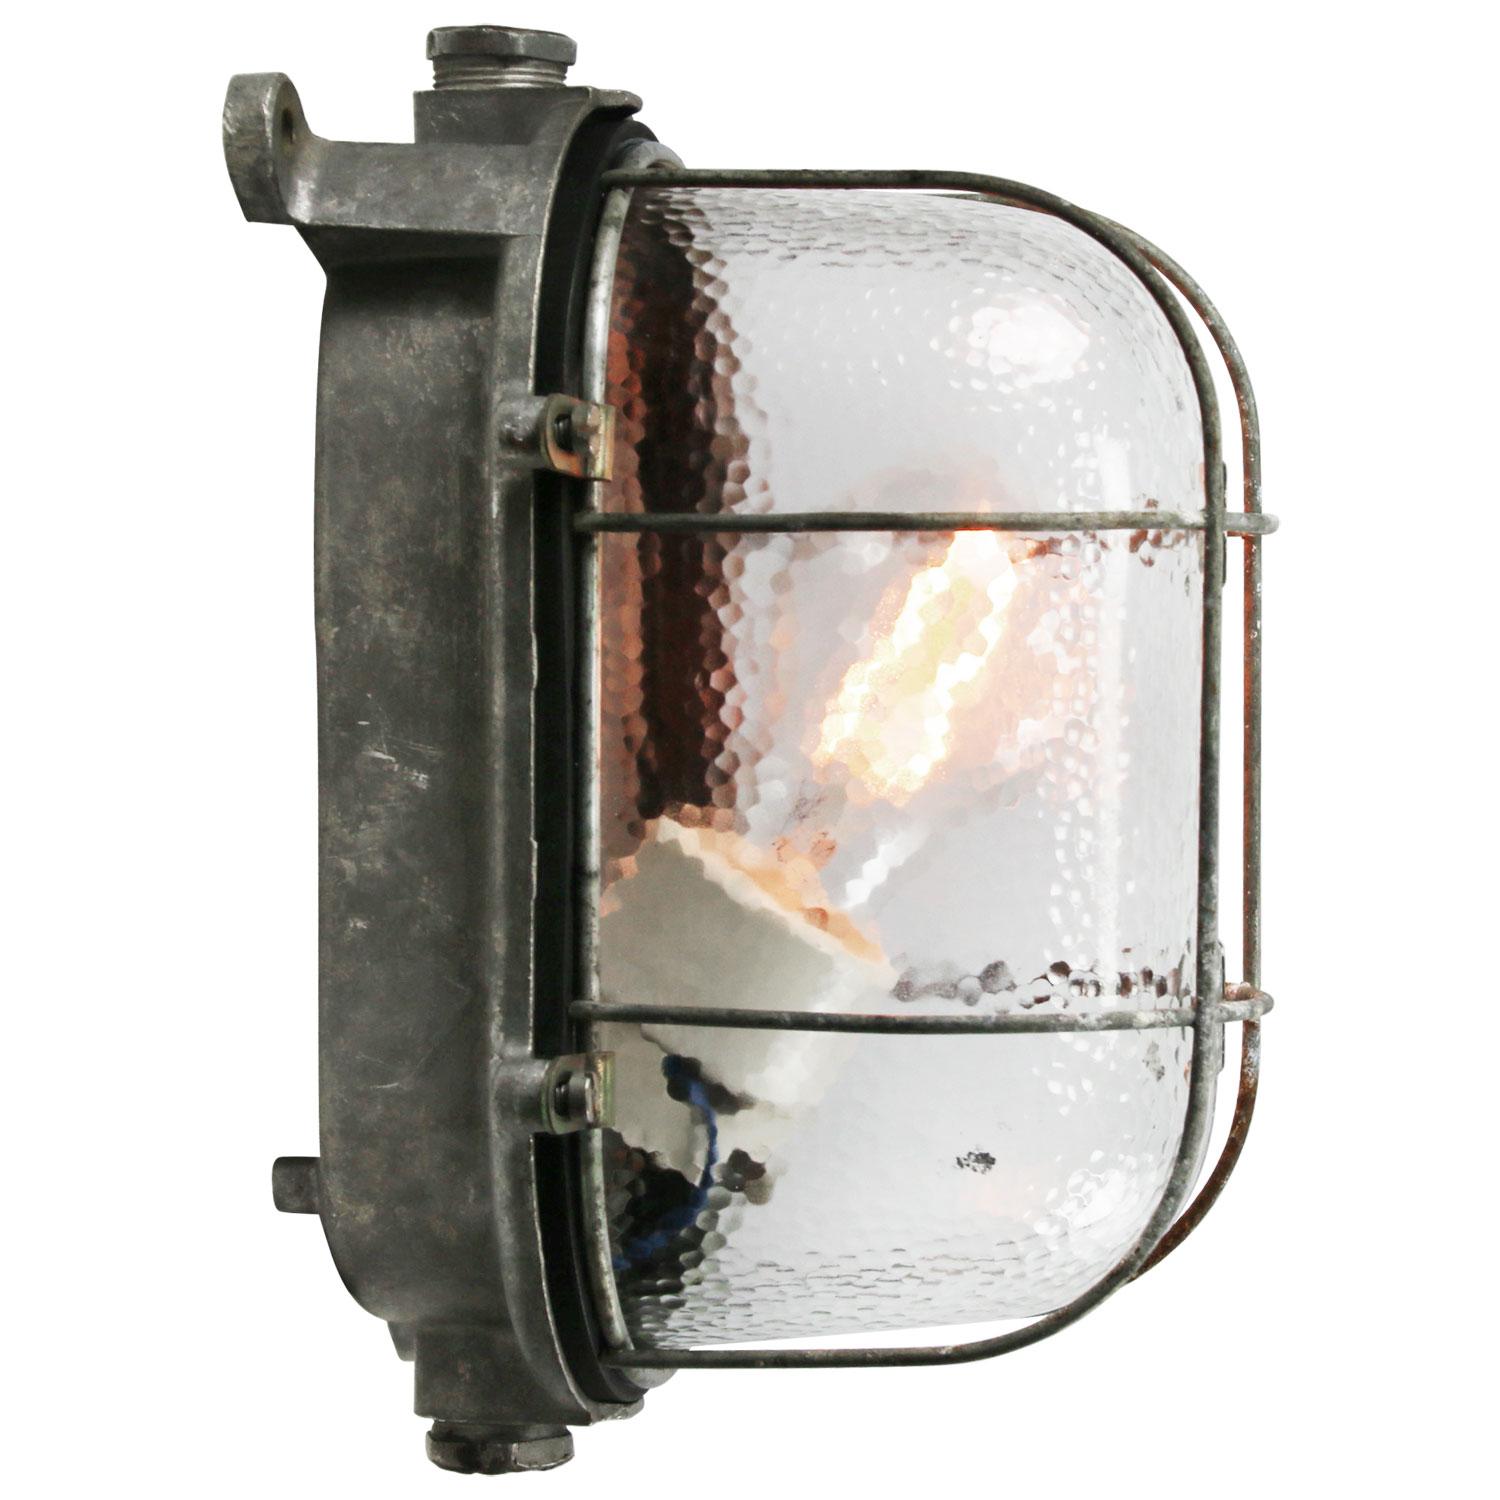 Industrial wall, scone or ceiling lamp
Cast aluminum, frosted glass + metal cage

Weight: 1.40 kg / 3.1 lb

Priced per individual item. All lamps have been made suitable by international standards for incandescent light bulbs, energy-efficient